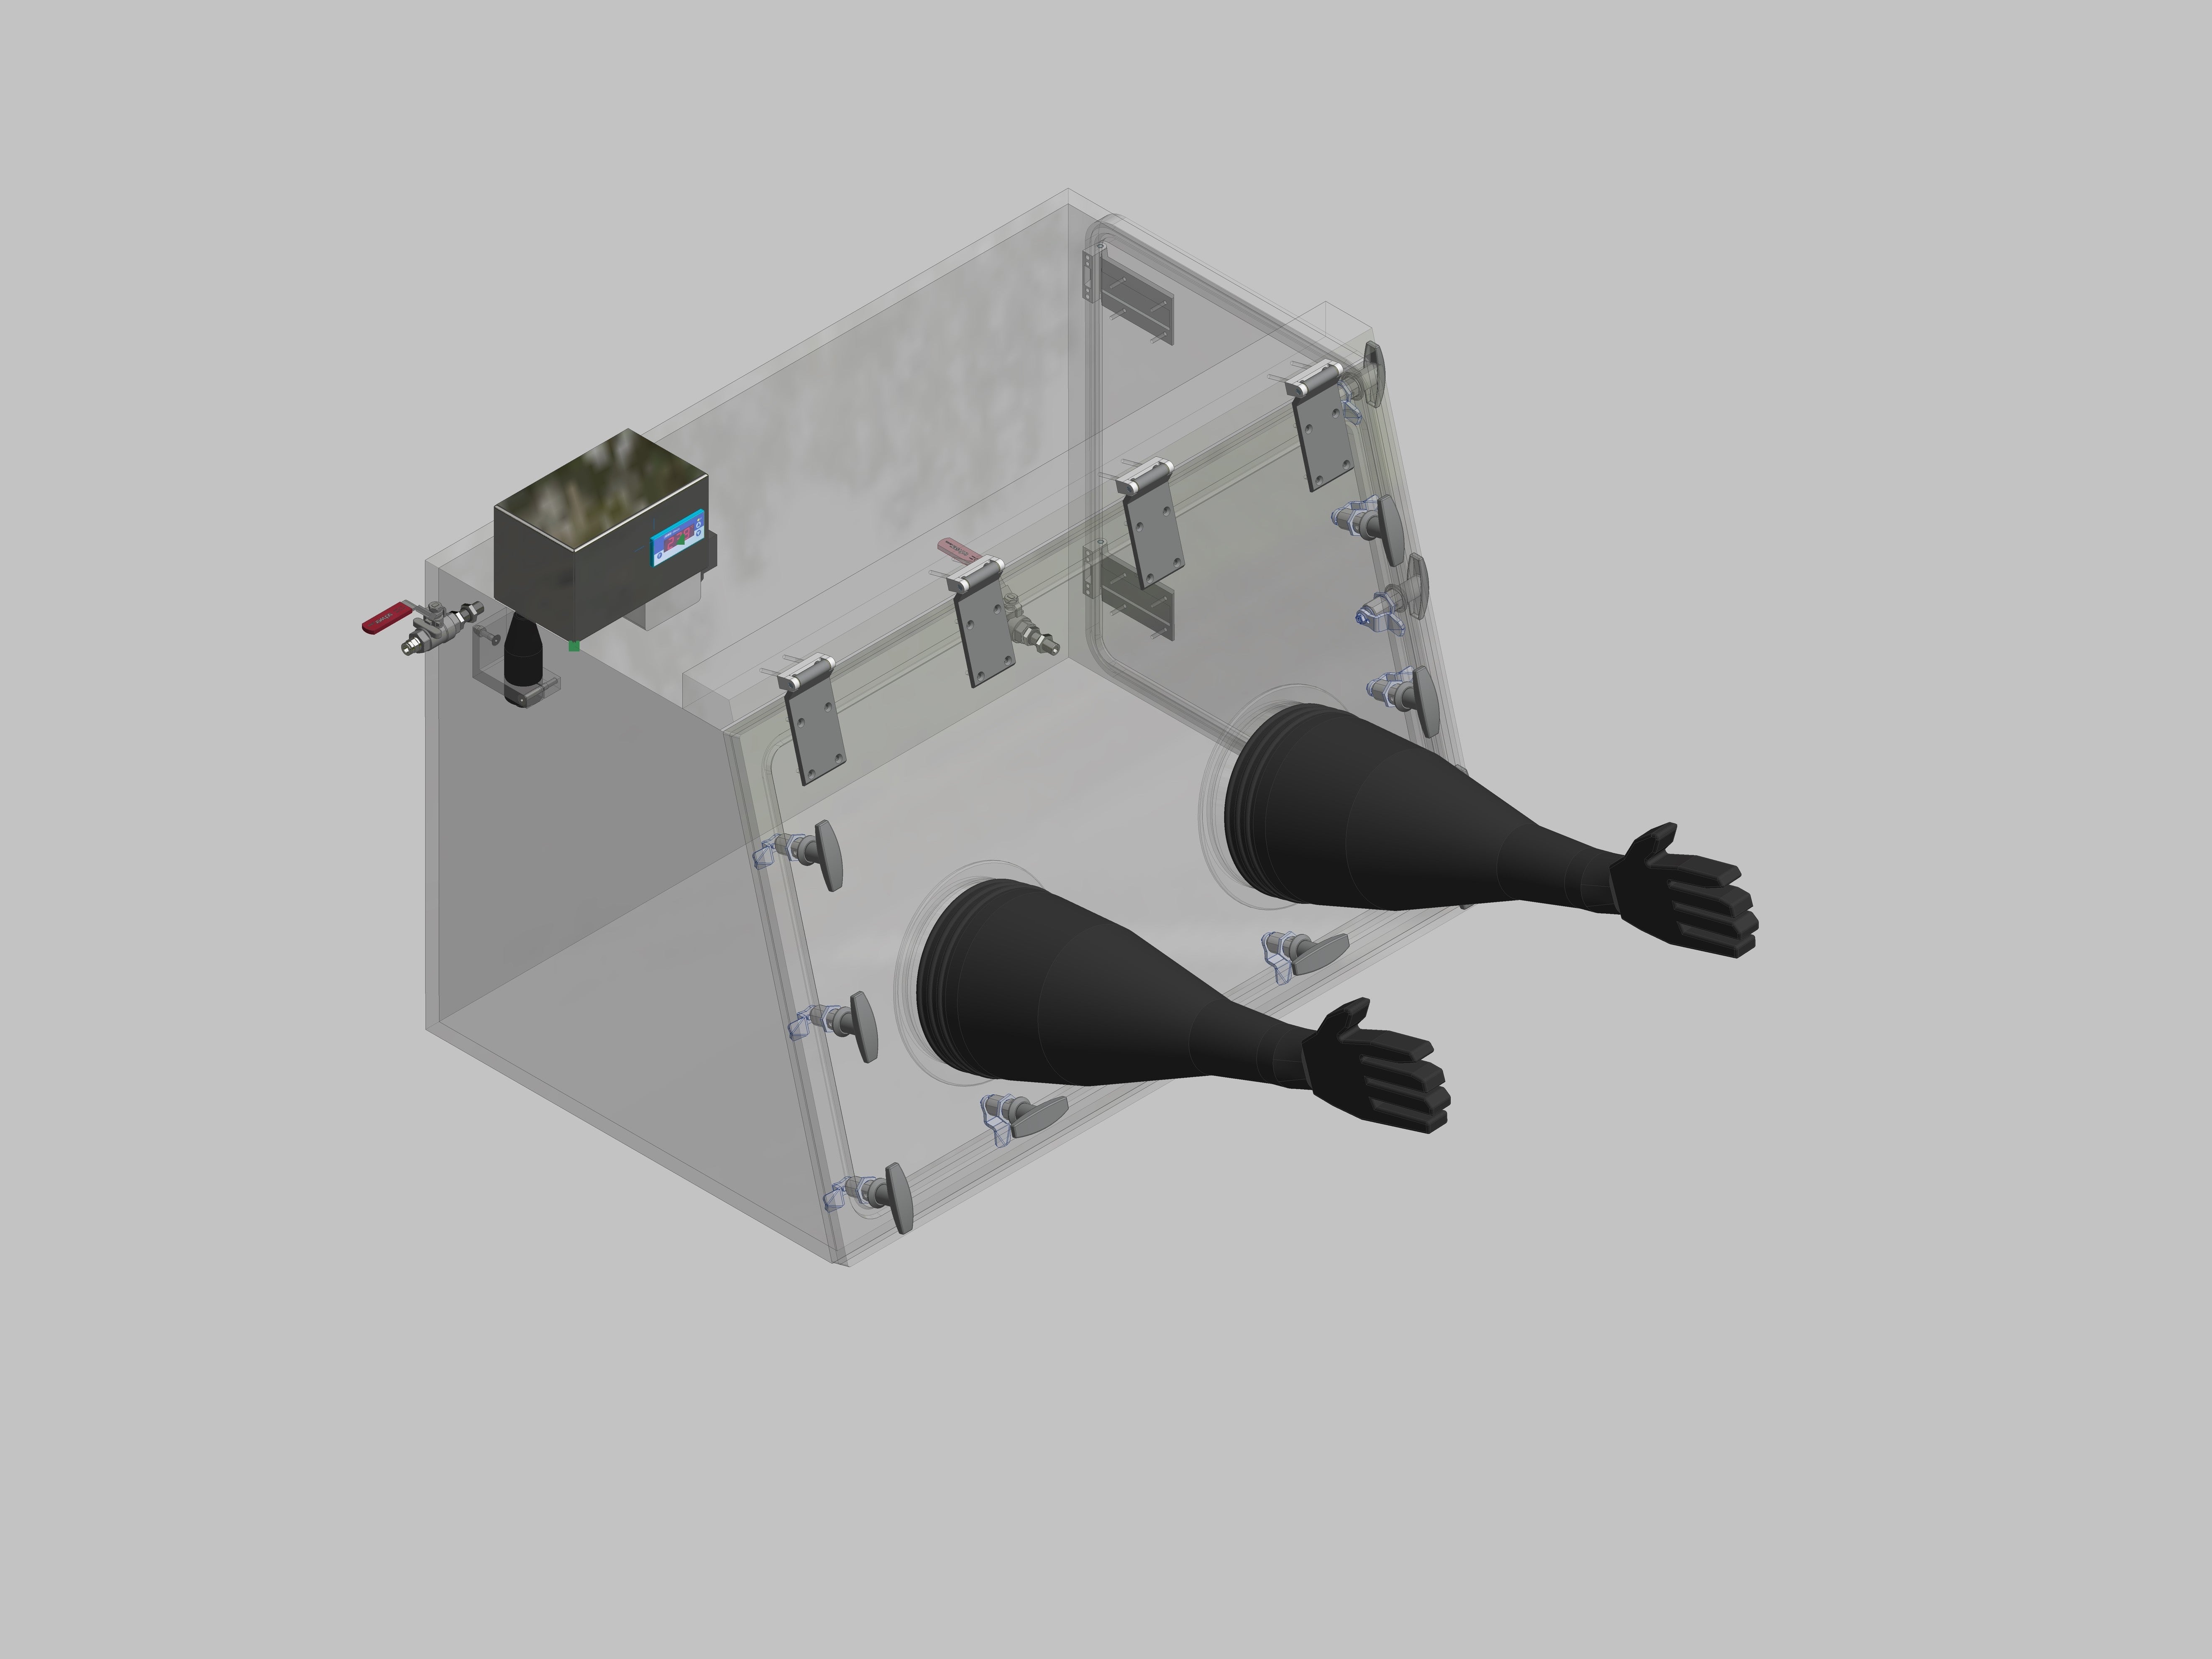 Glovebox made of acrylic &gt; Gas filling: by hand, front design: swivels upwards, side design: hinged doors, control: oxygen display